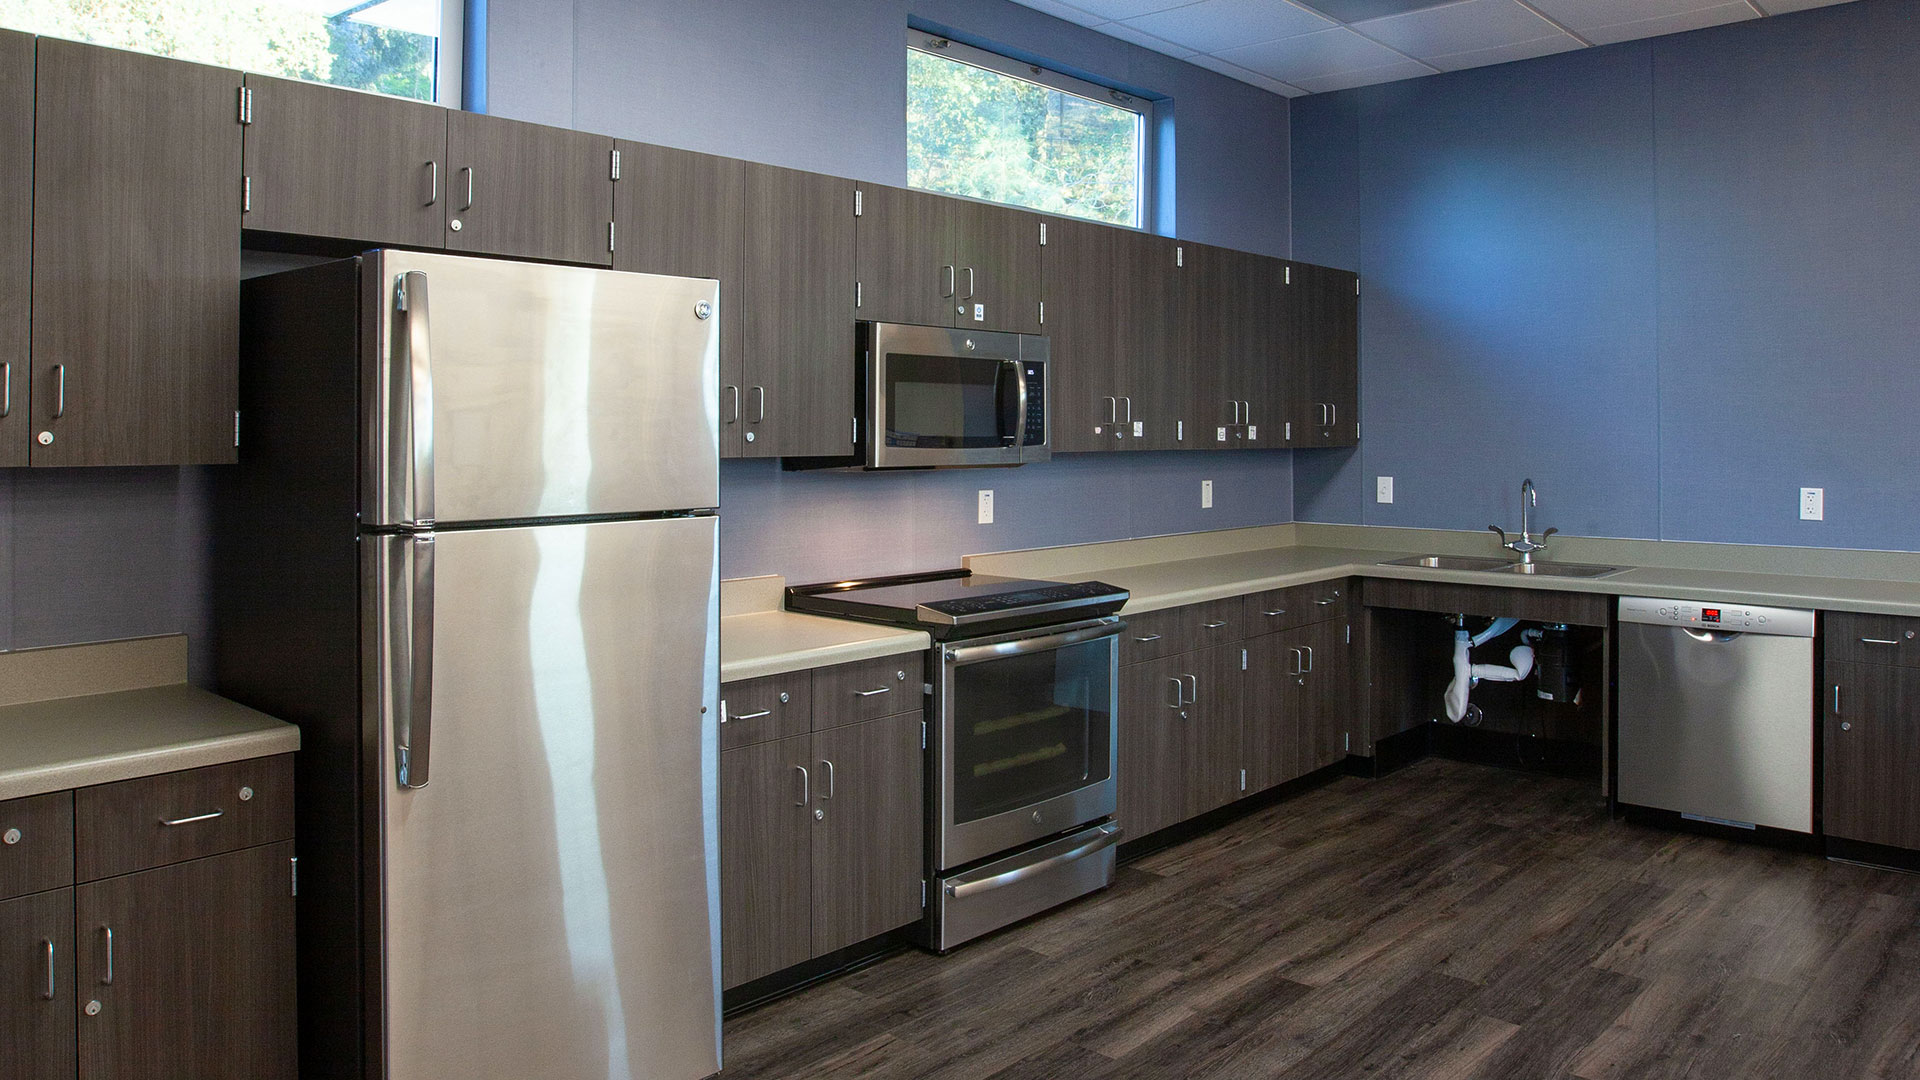 Kitchen area in classroom, with gray cabinets and sleek gray wooden vinyl flooring.